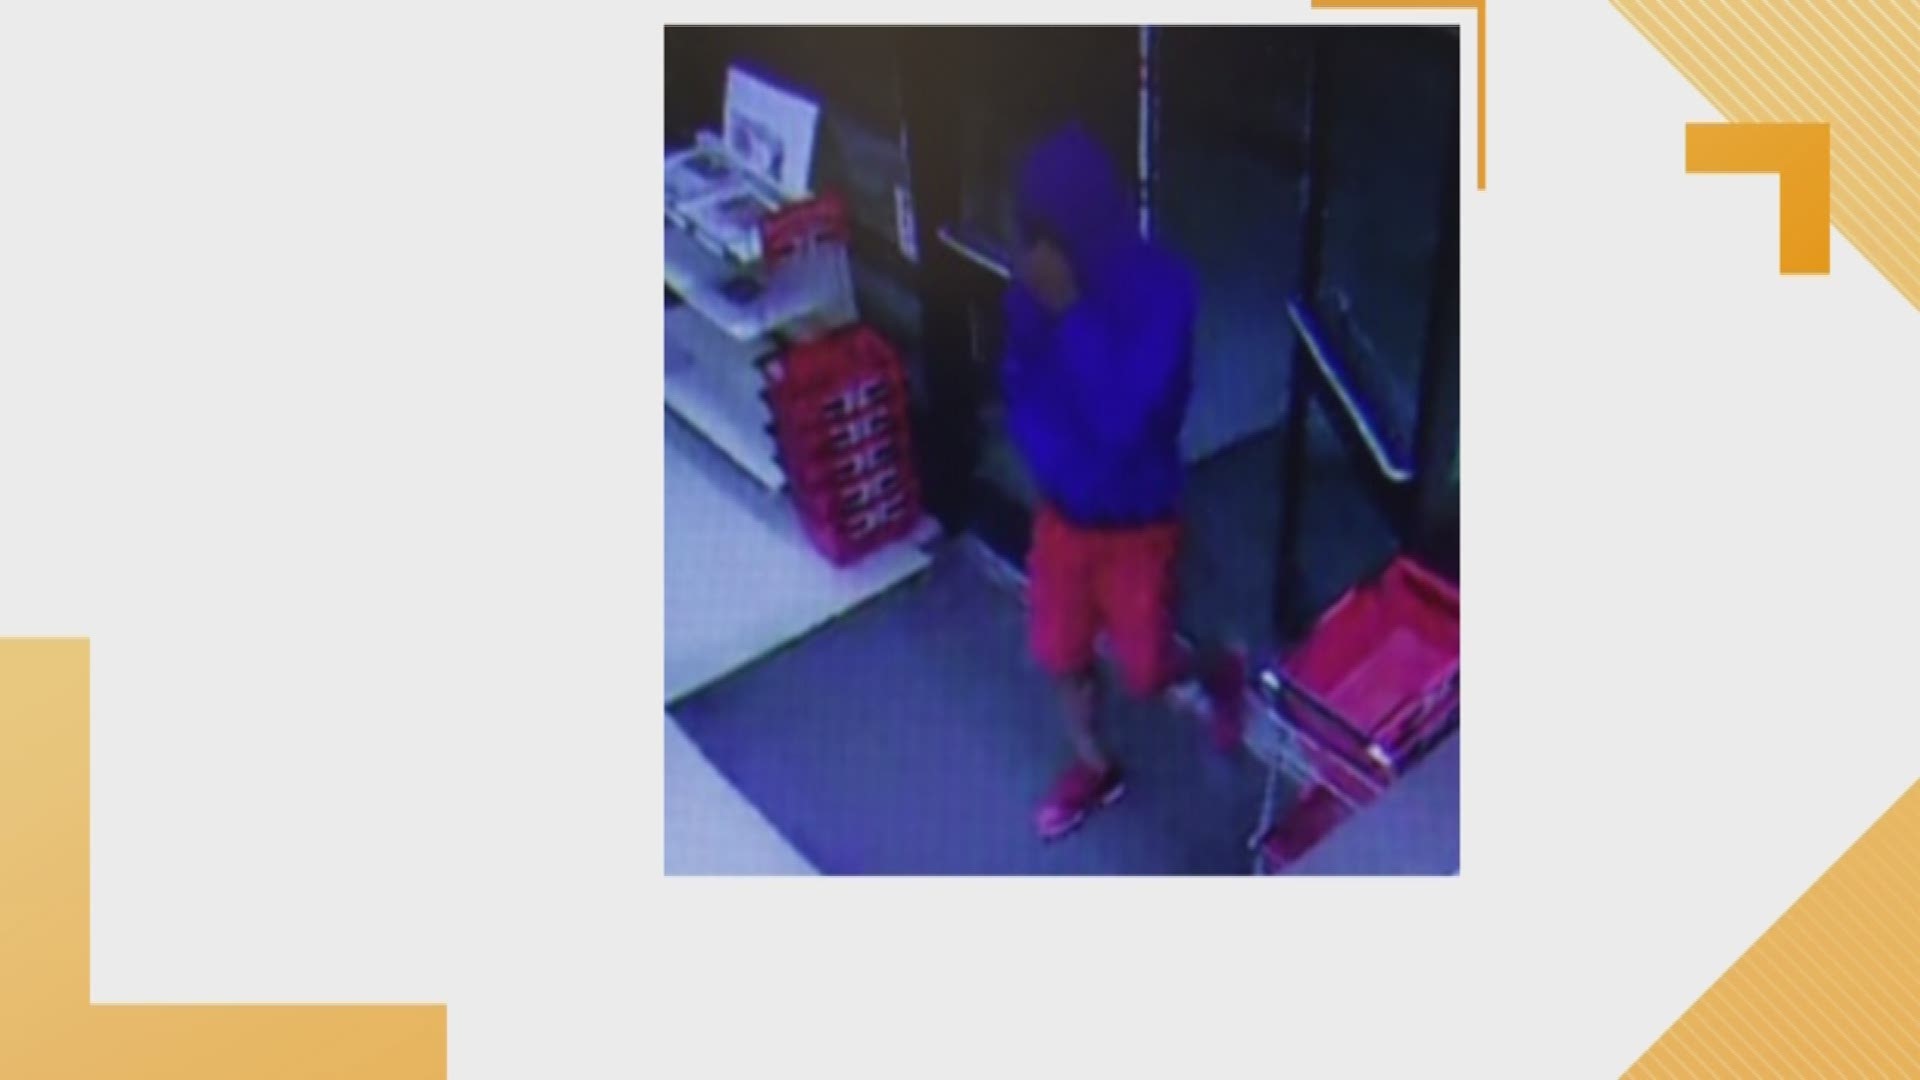 Police are looking for a man who robbed a 7-Eleven in Suffolk at gunpoint.